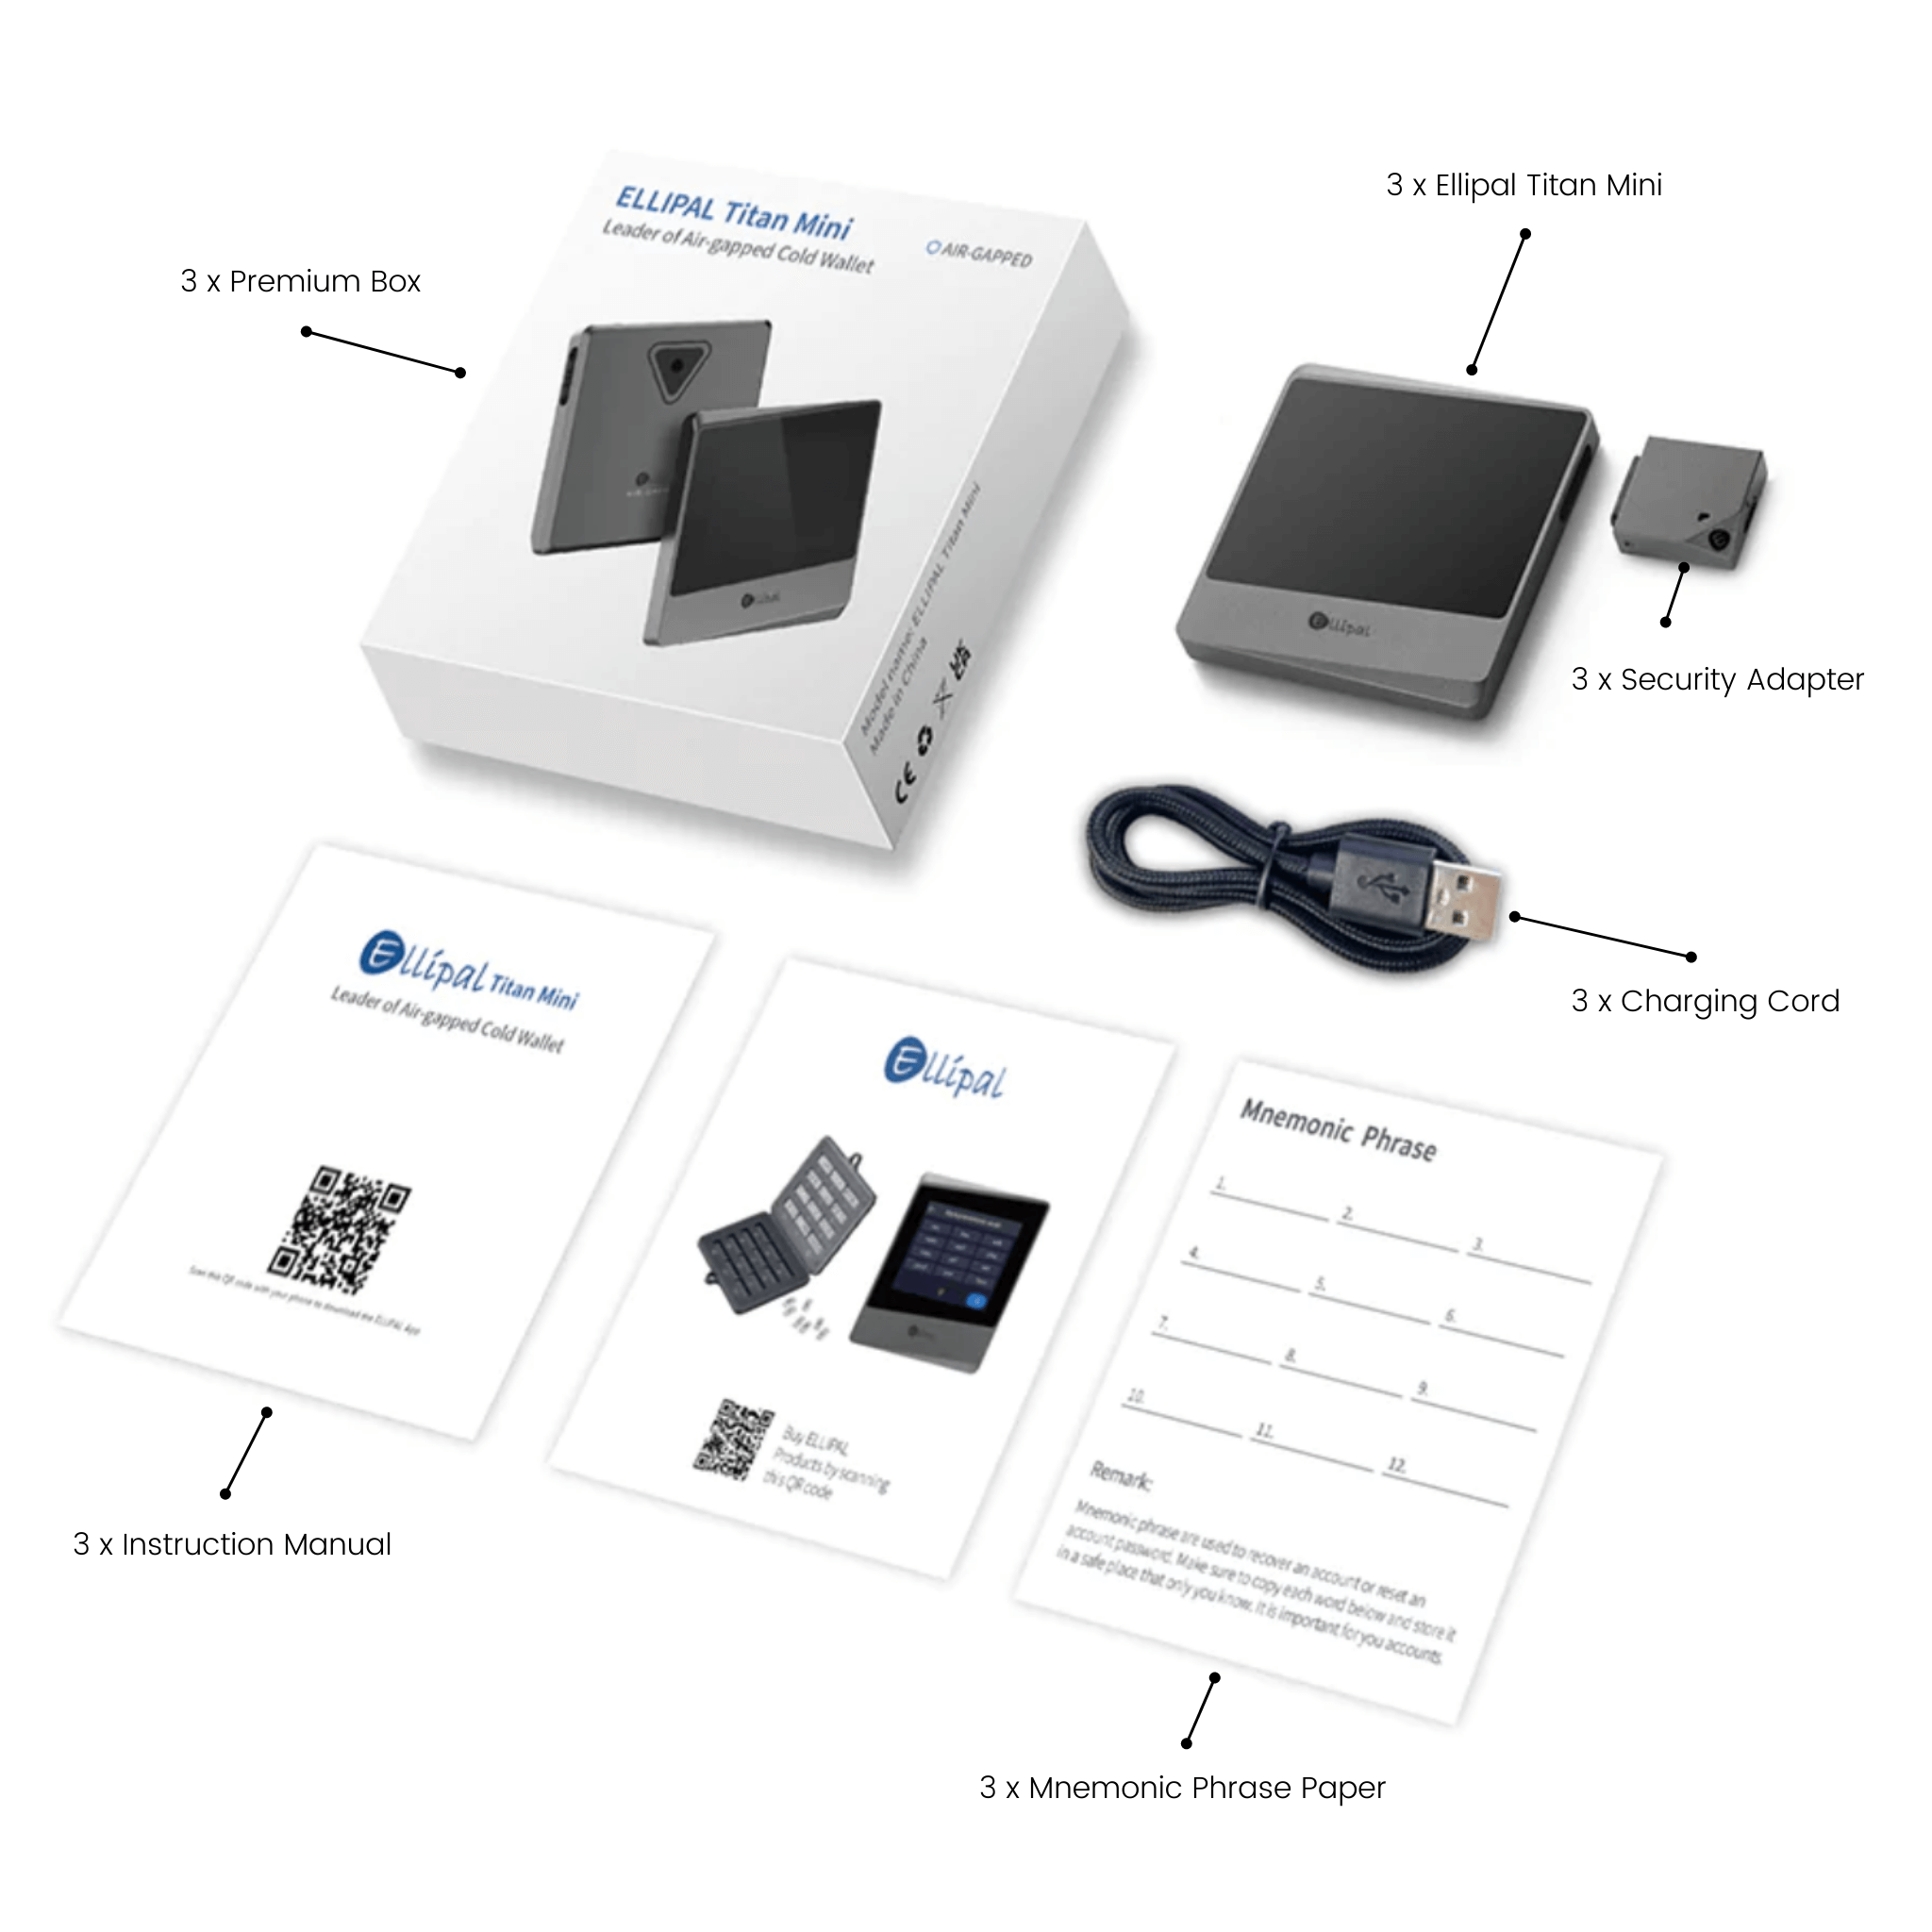 Ellipal Titan Mini Grey Pack of 3 Cryptocurrency Hardware Wallets Package Contents